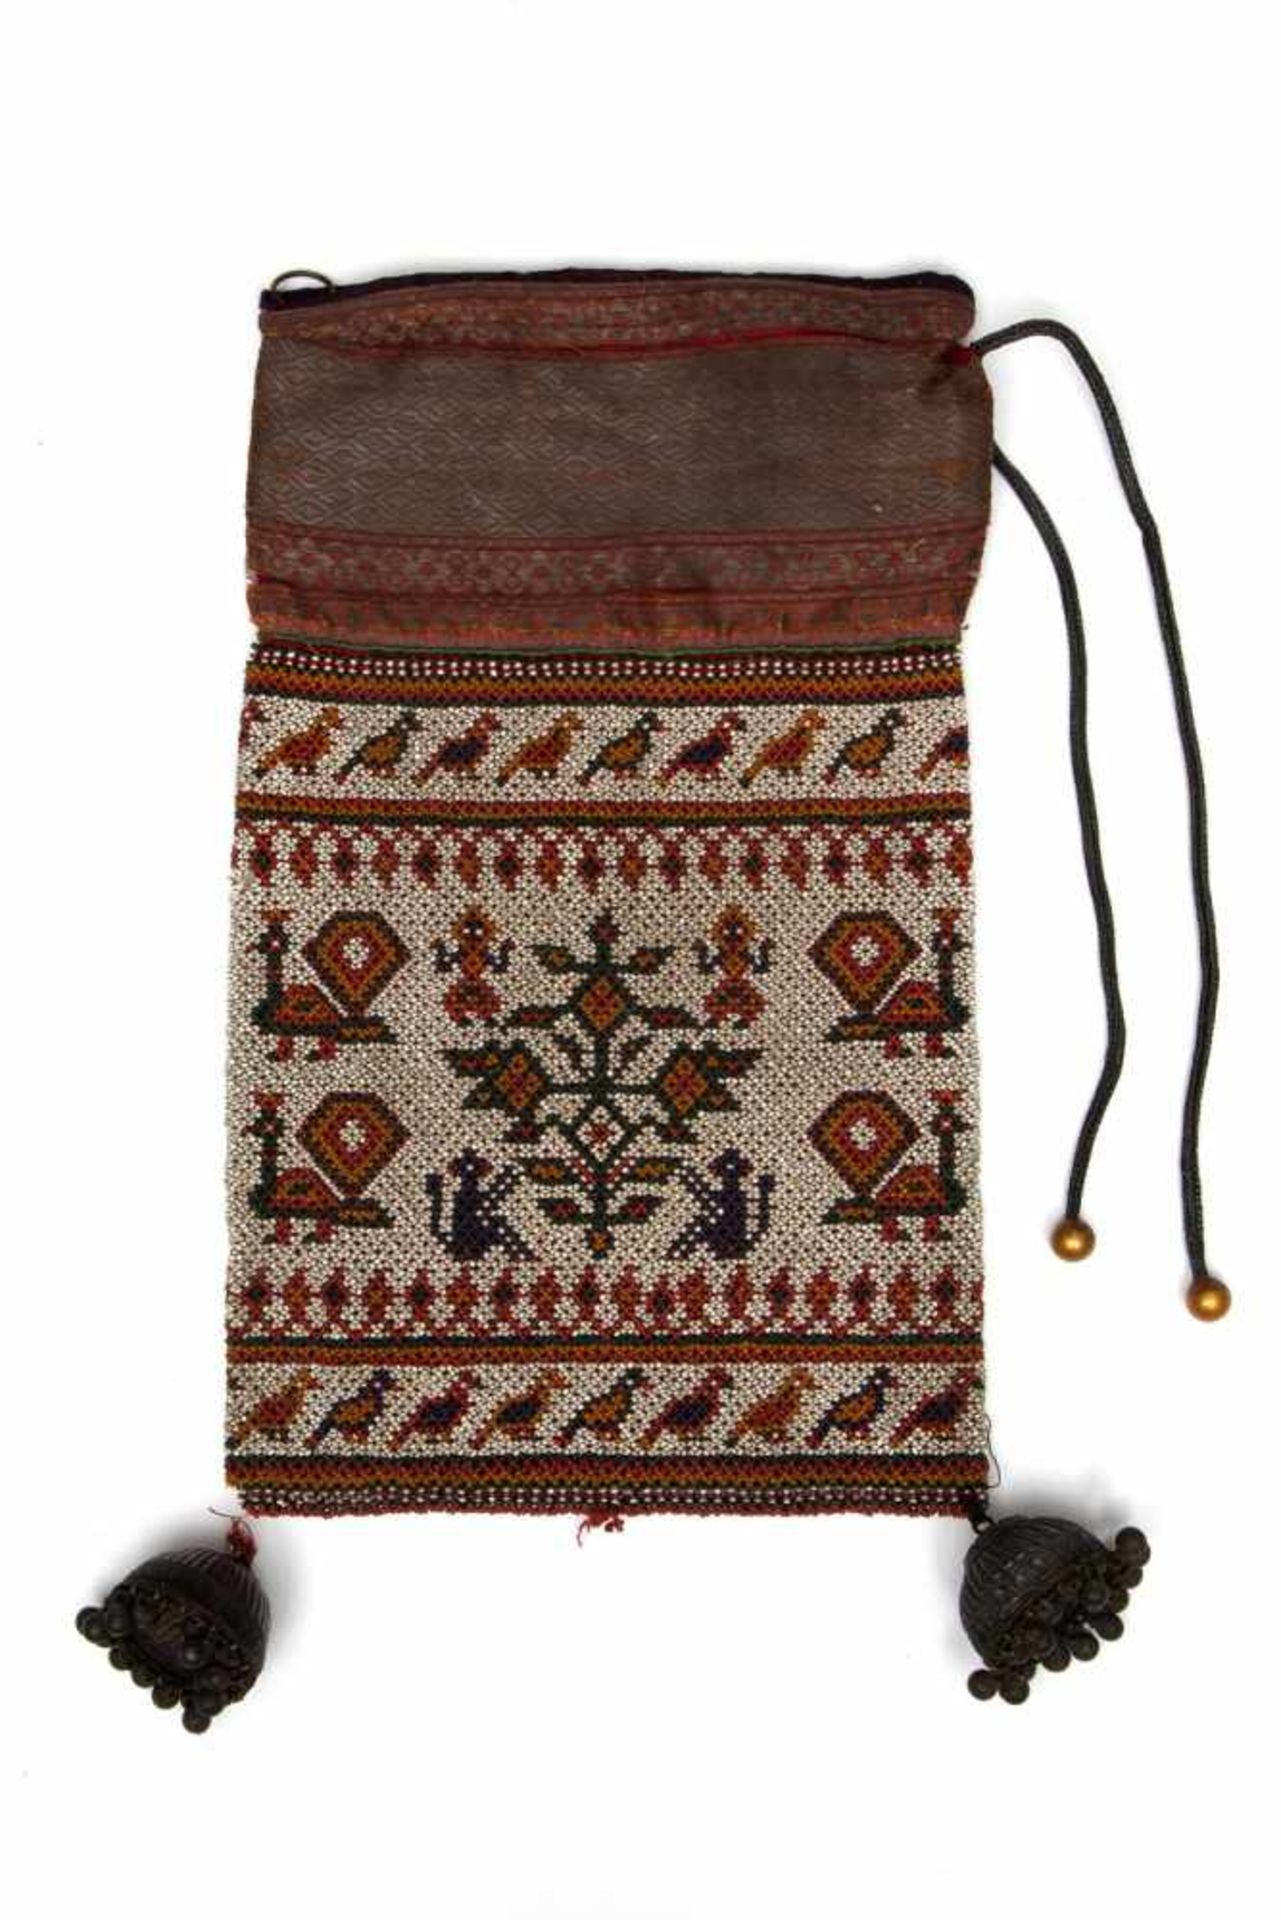 India, Gujarat, court art bag with glass beaded panels, possibly 16th-17th century.depicting a